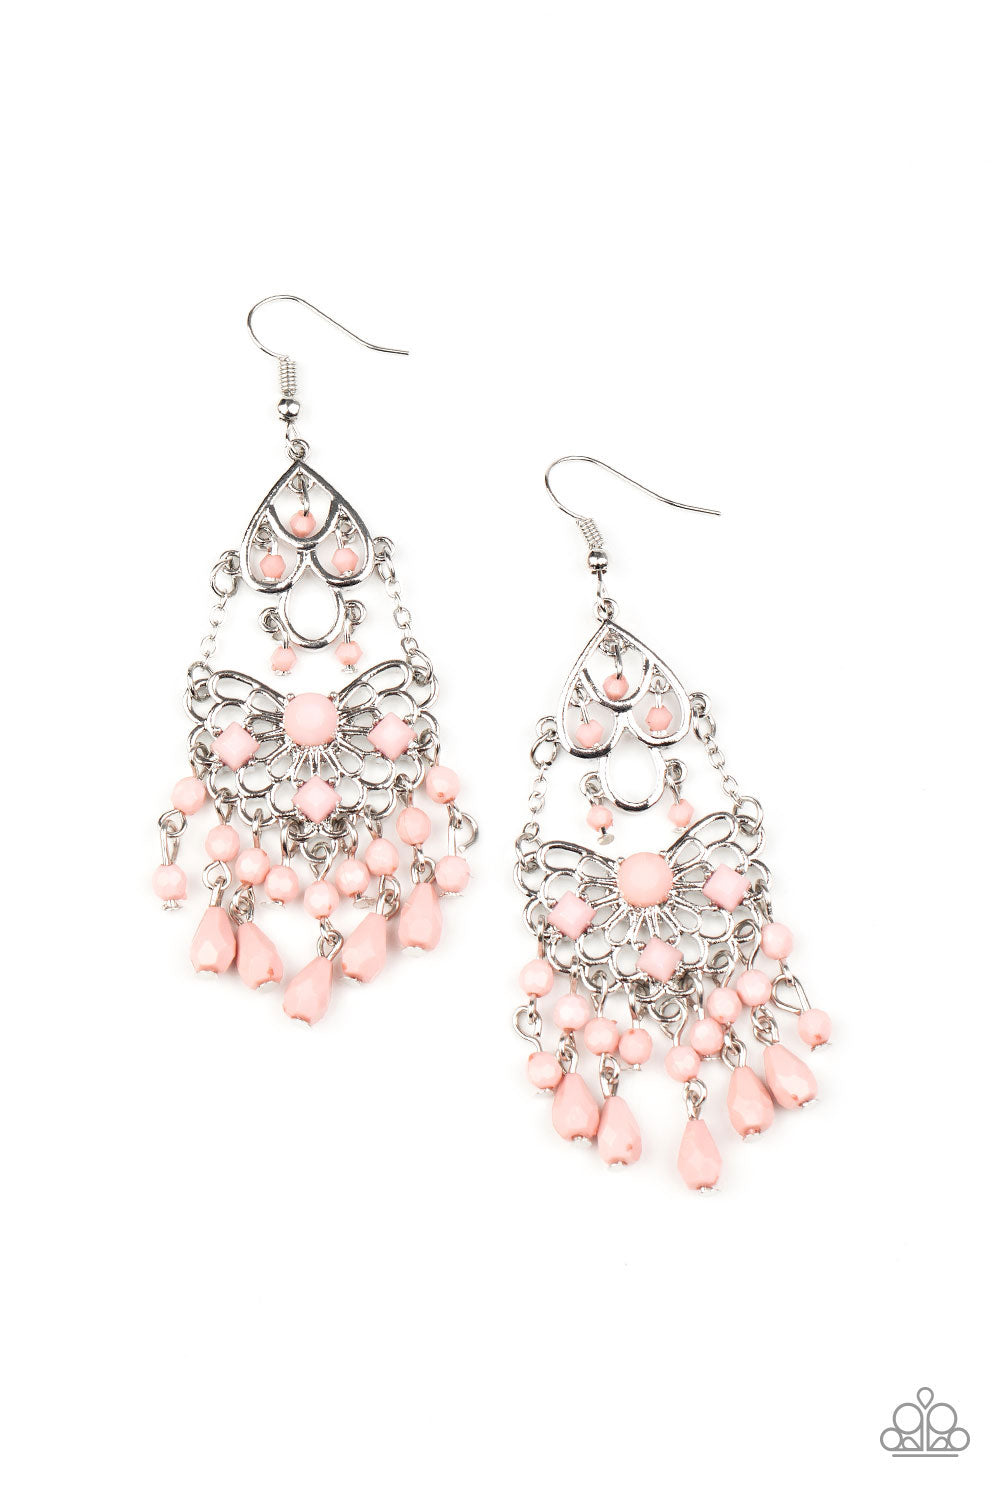 five-dollar-jewelry-glass-slipper-glamour-pink-earrings-paparazzi-accessories